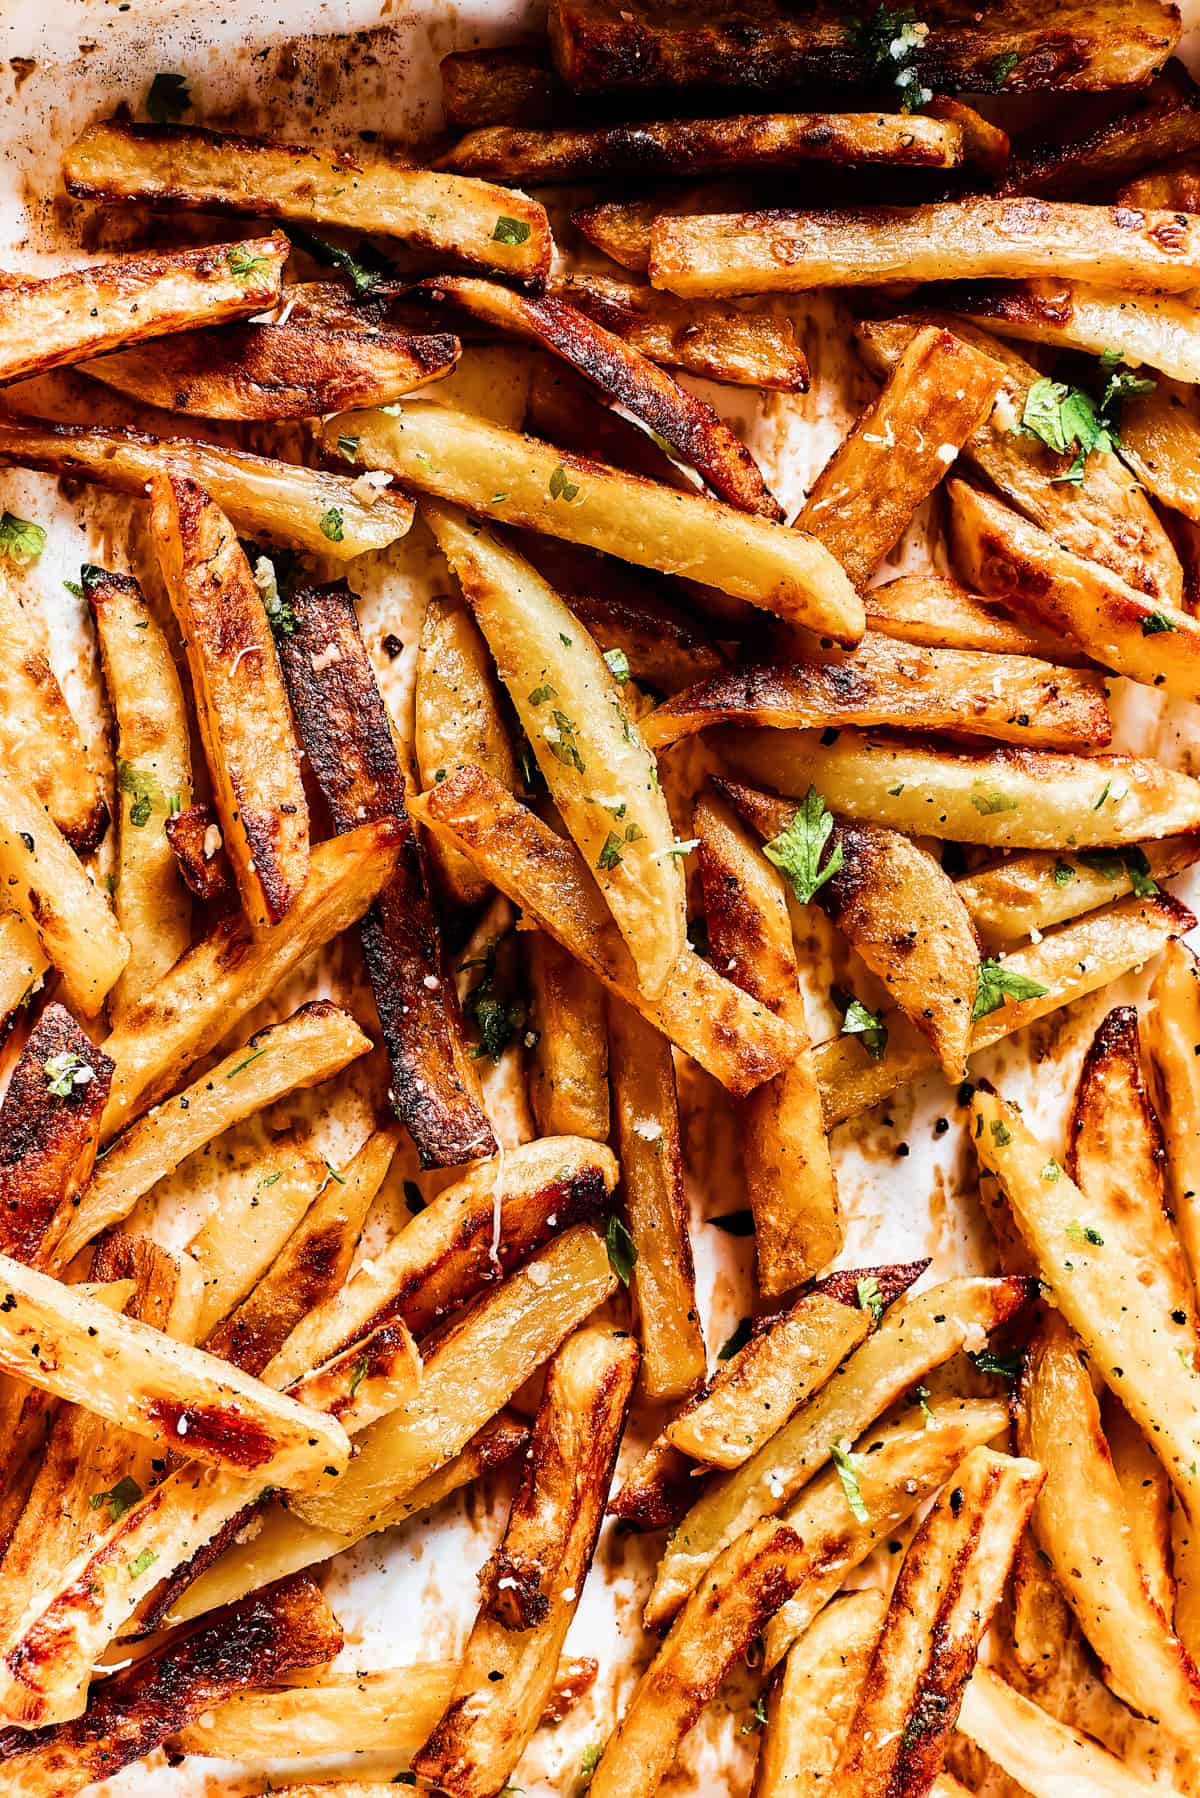 Baked fries drizzled with garlic butter and sprinkled with parsley and parmesan.